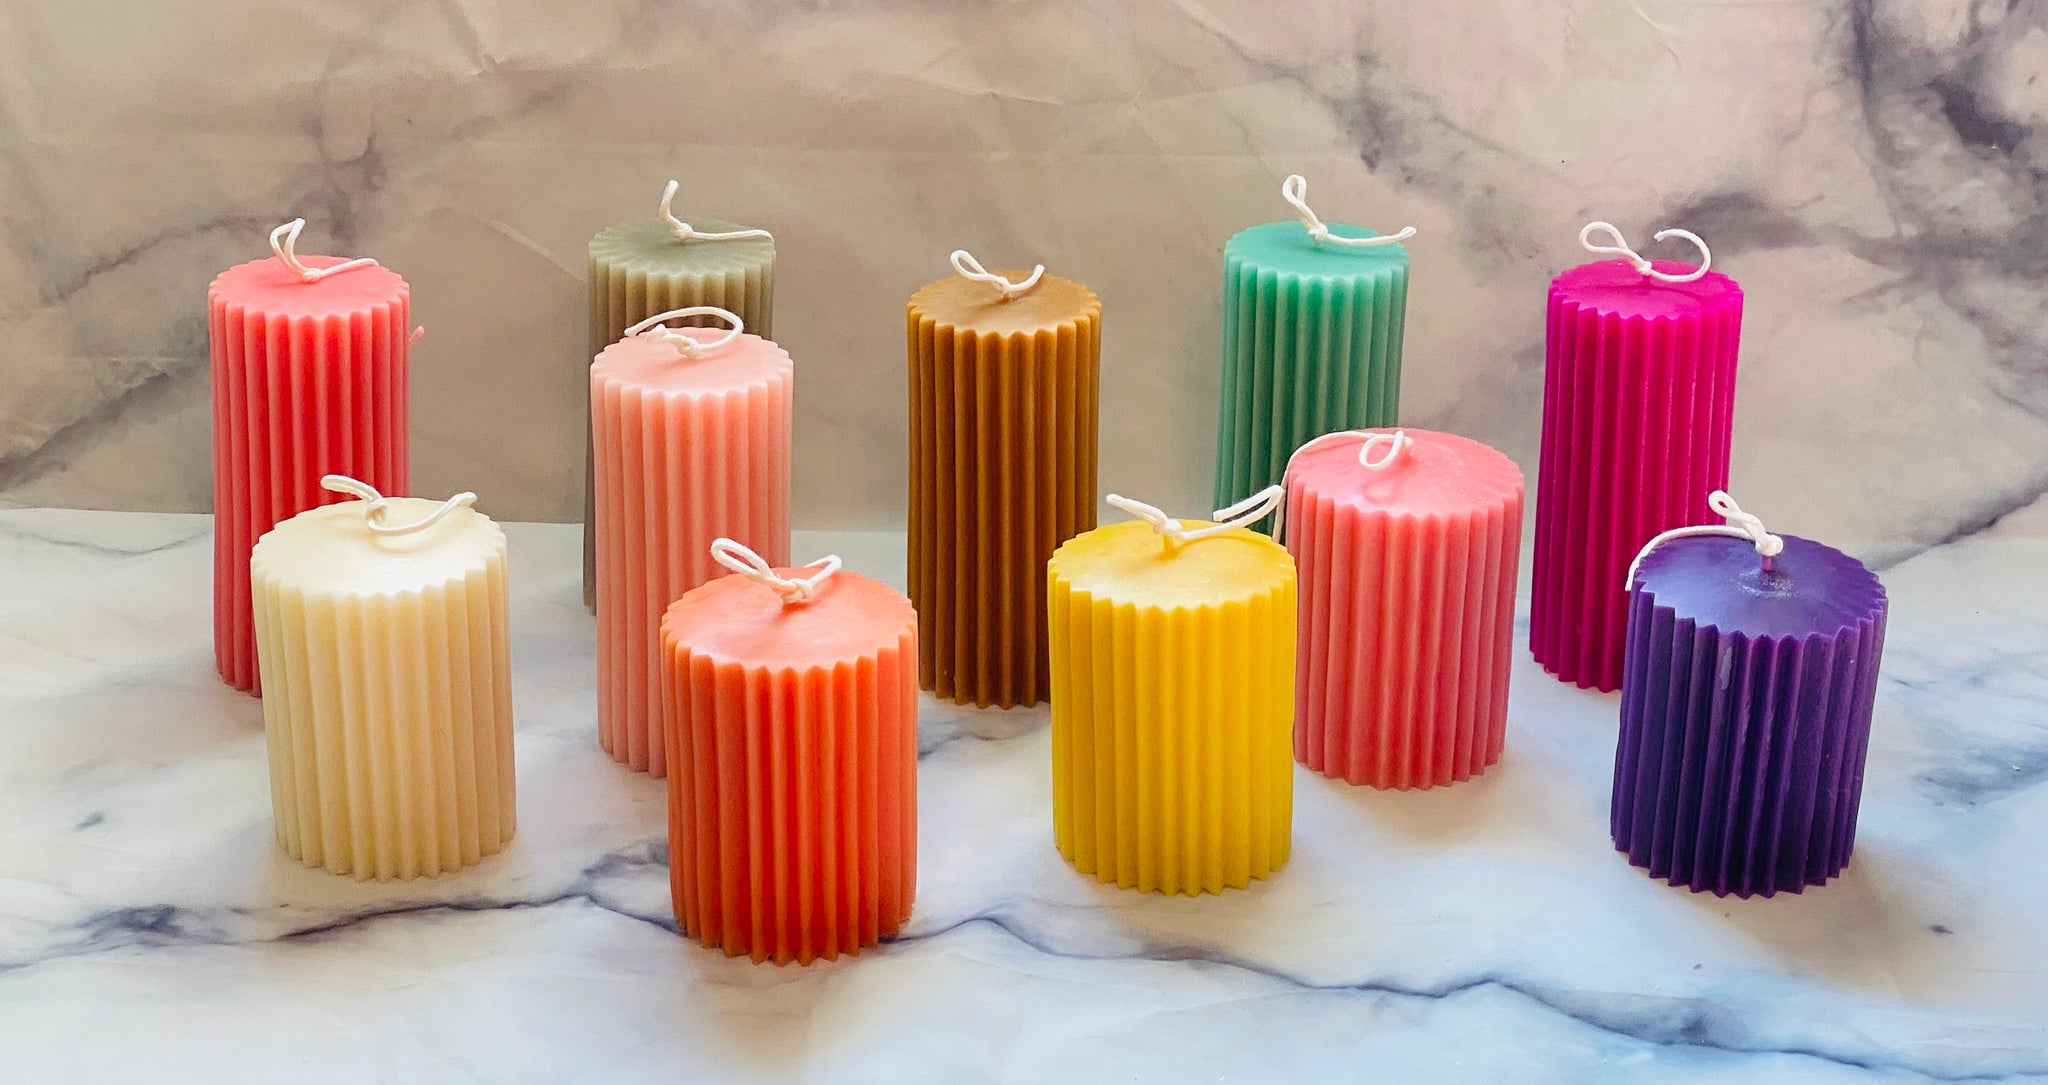 Coral's Beeswax Candles